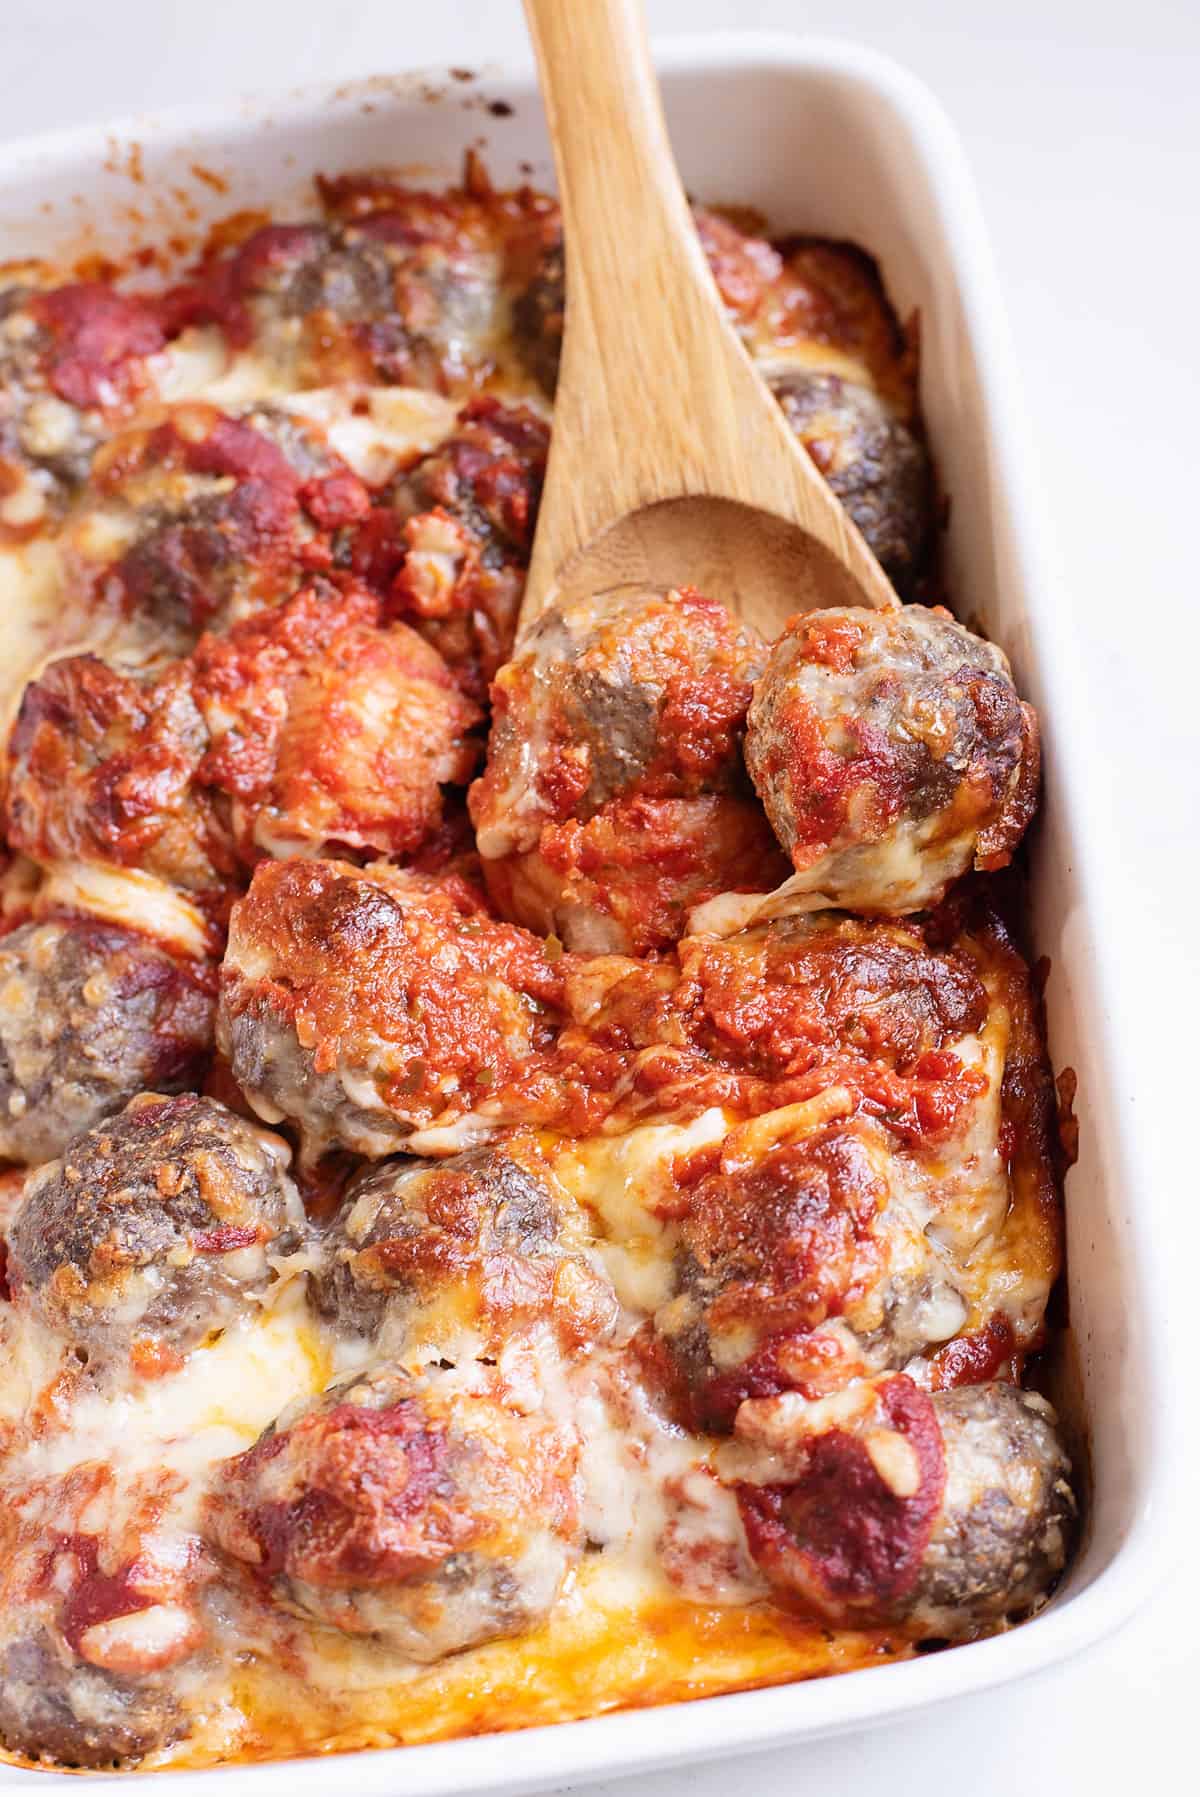 cheesy meatball sub casserole in baking dish with wooden spoon